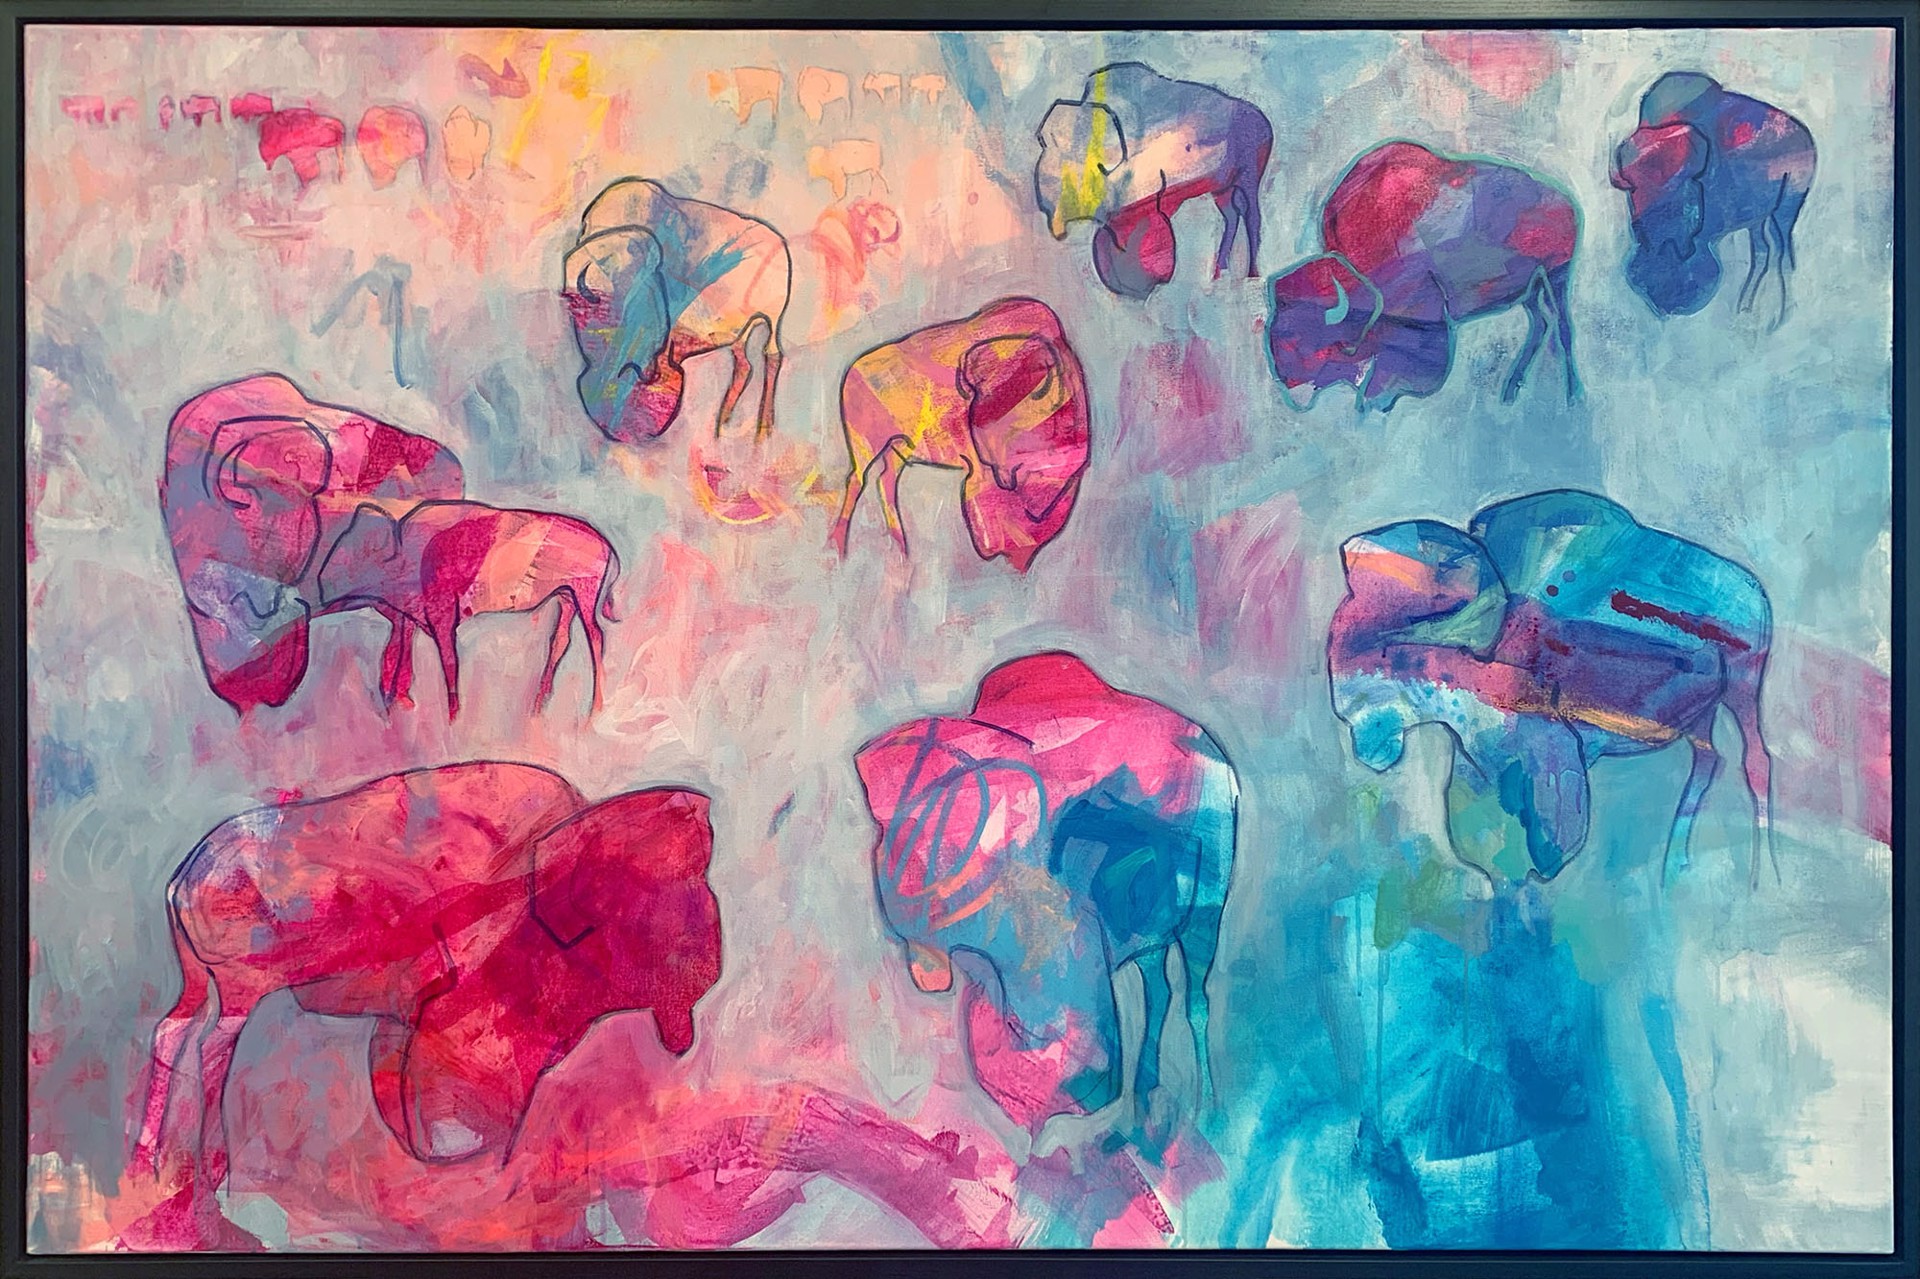 A Contemporary Abstract Painting Of Bison On A Colorful Background By Carrie Wild At Gallery Wild